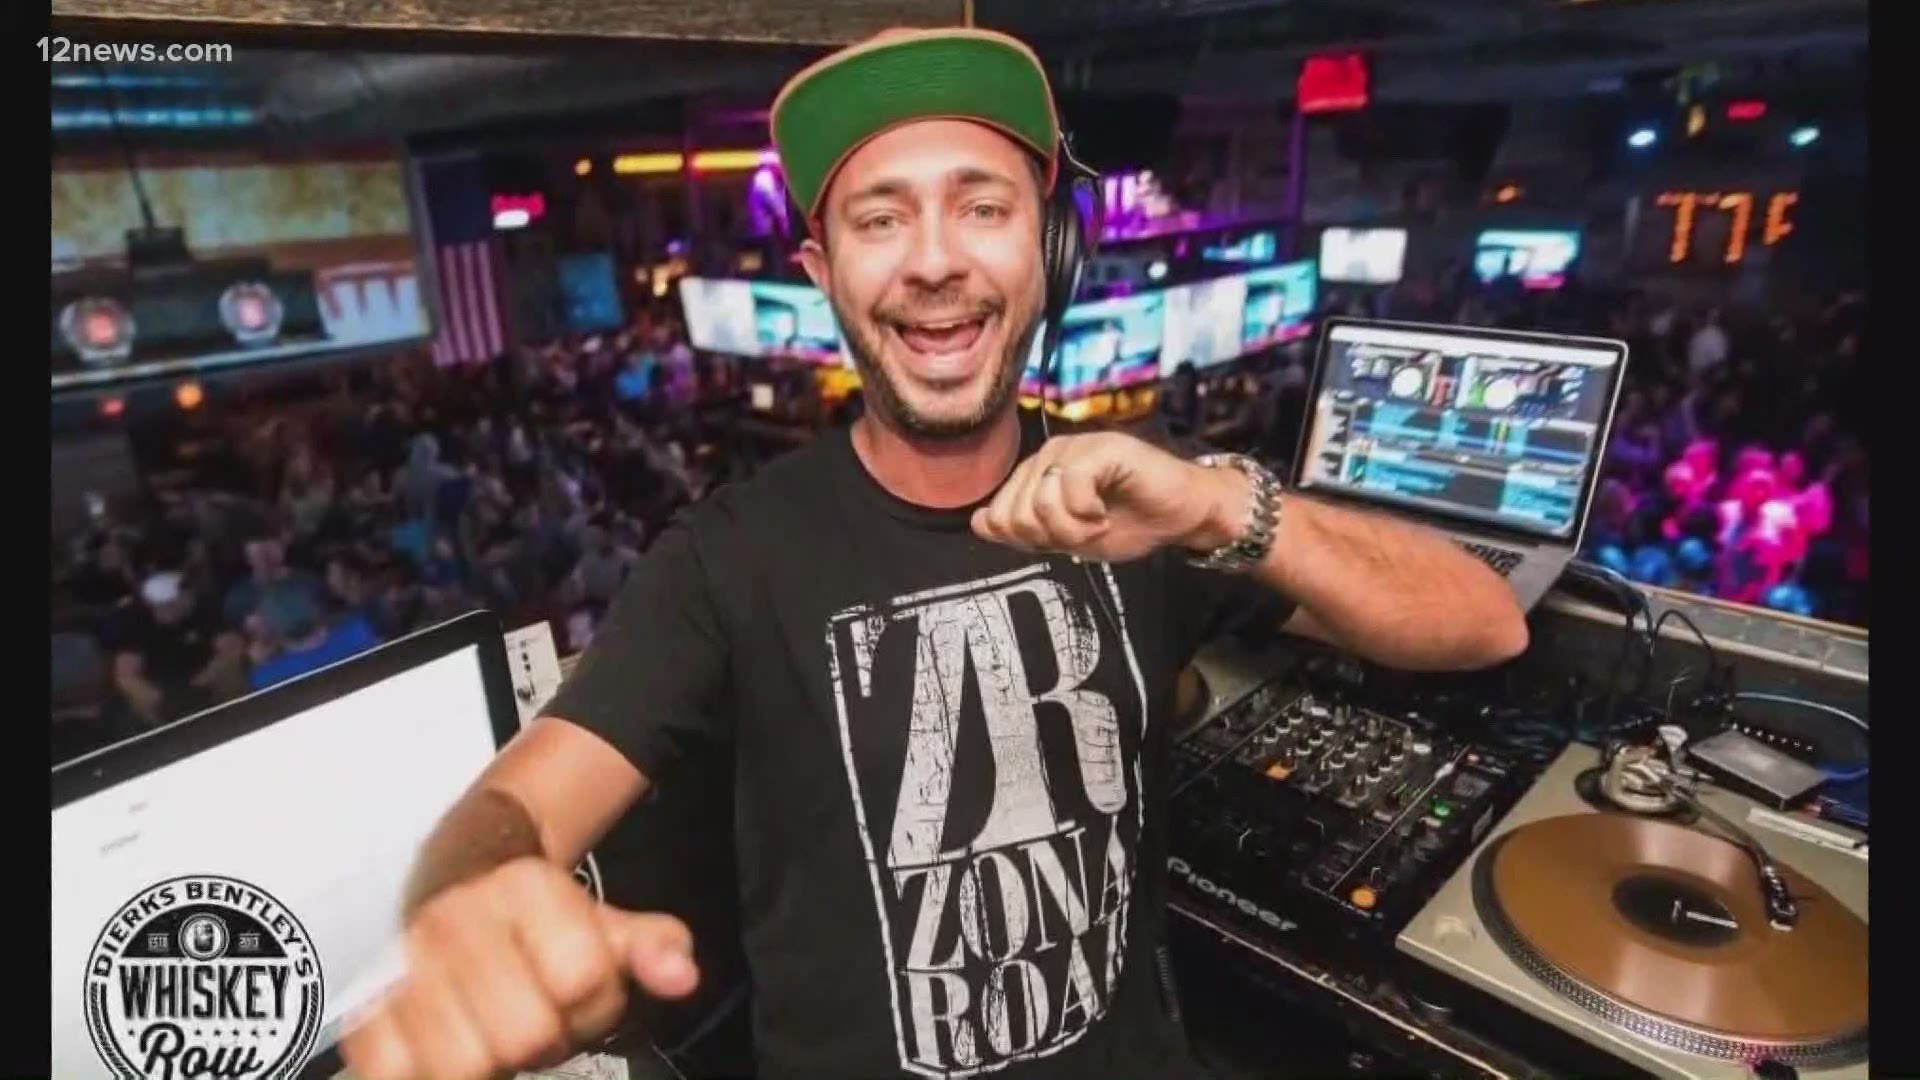 Kris Chupp, better known as DJ Steele, mixed music at Valley clubs like Salty Senorita and Whisky Row. He was the face behind the music, now he's the face of COVID.